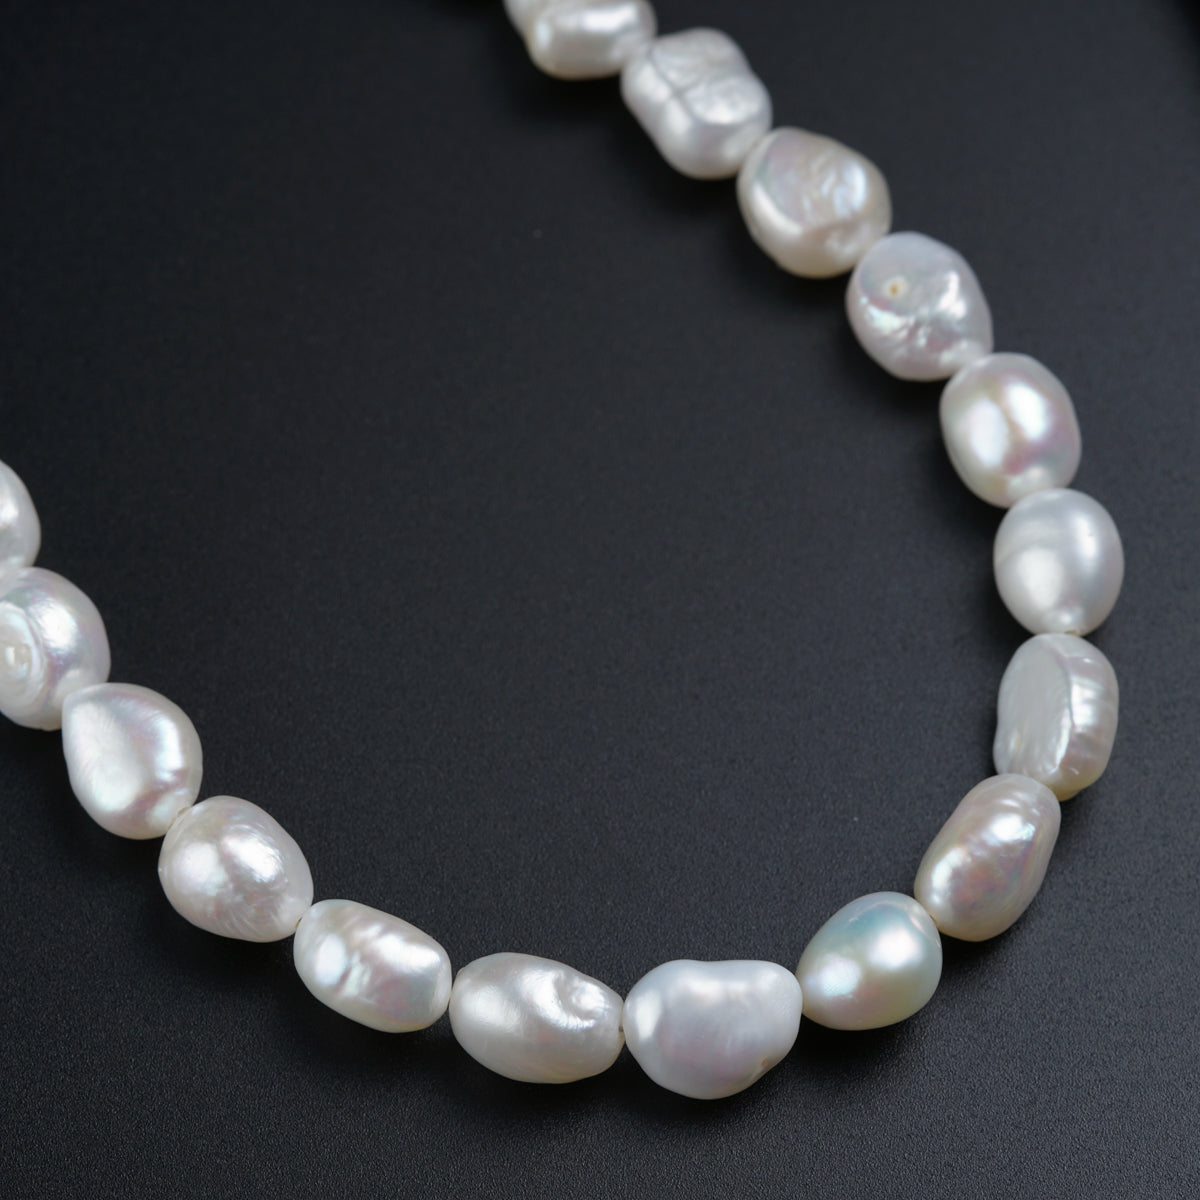 a necklace of white pearls on a black surface